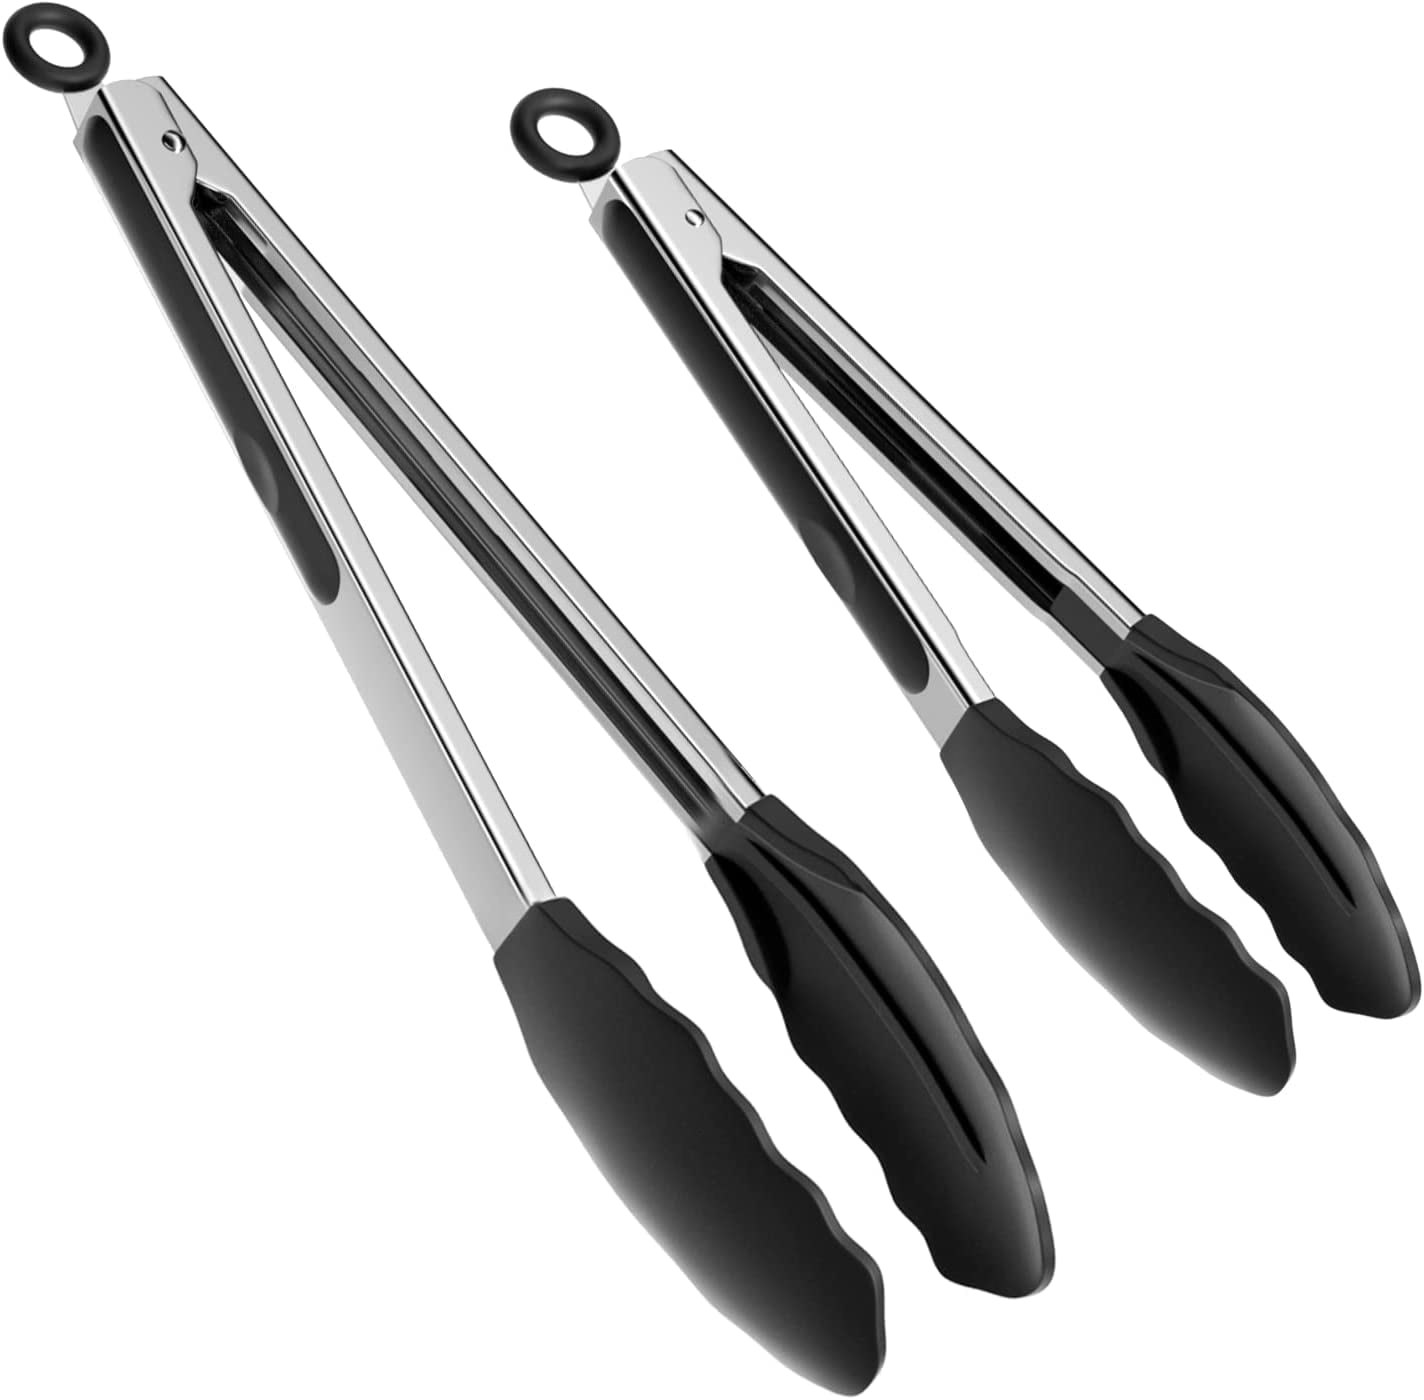 Choice 12 Silicone Tip Locking Tongs with Black Non-Slip Grip Handle